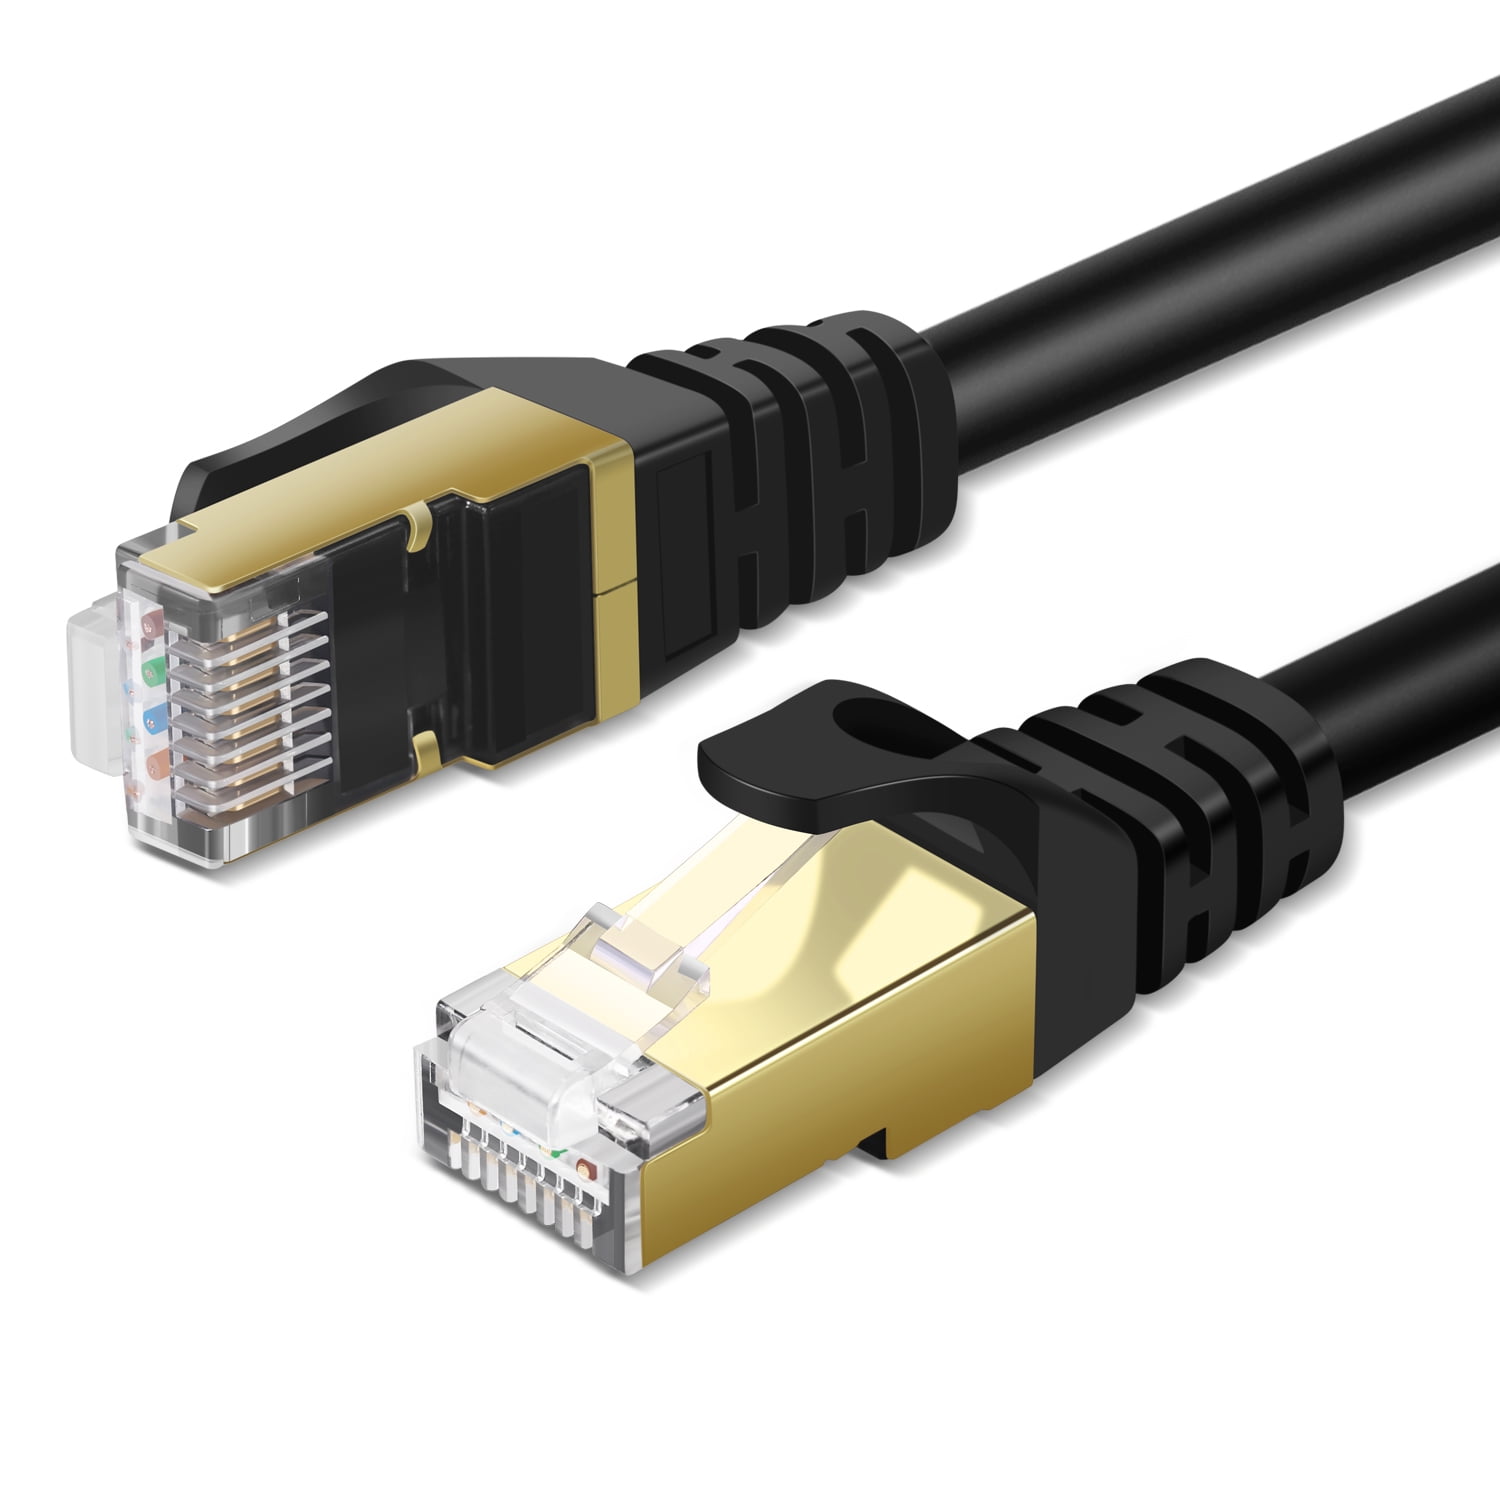 Vibrar vitalidad Eficiente CAT 7 Ethernet Cable 100ft High Speed 10 Gbps 600MHz Black CAT7 Connector  LAN Network Gigabit Internet Wire Patch Cord with Professional S/STP Gold  Plated Premium Shielded Twisted Pair - Walmart.com